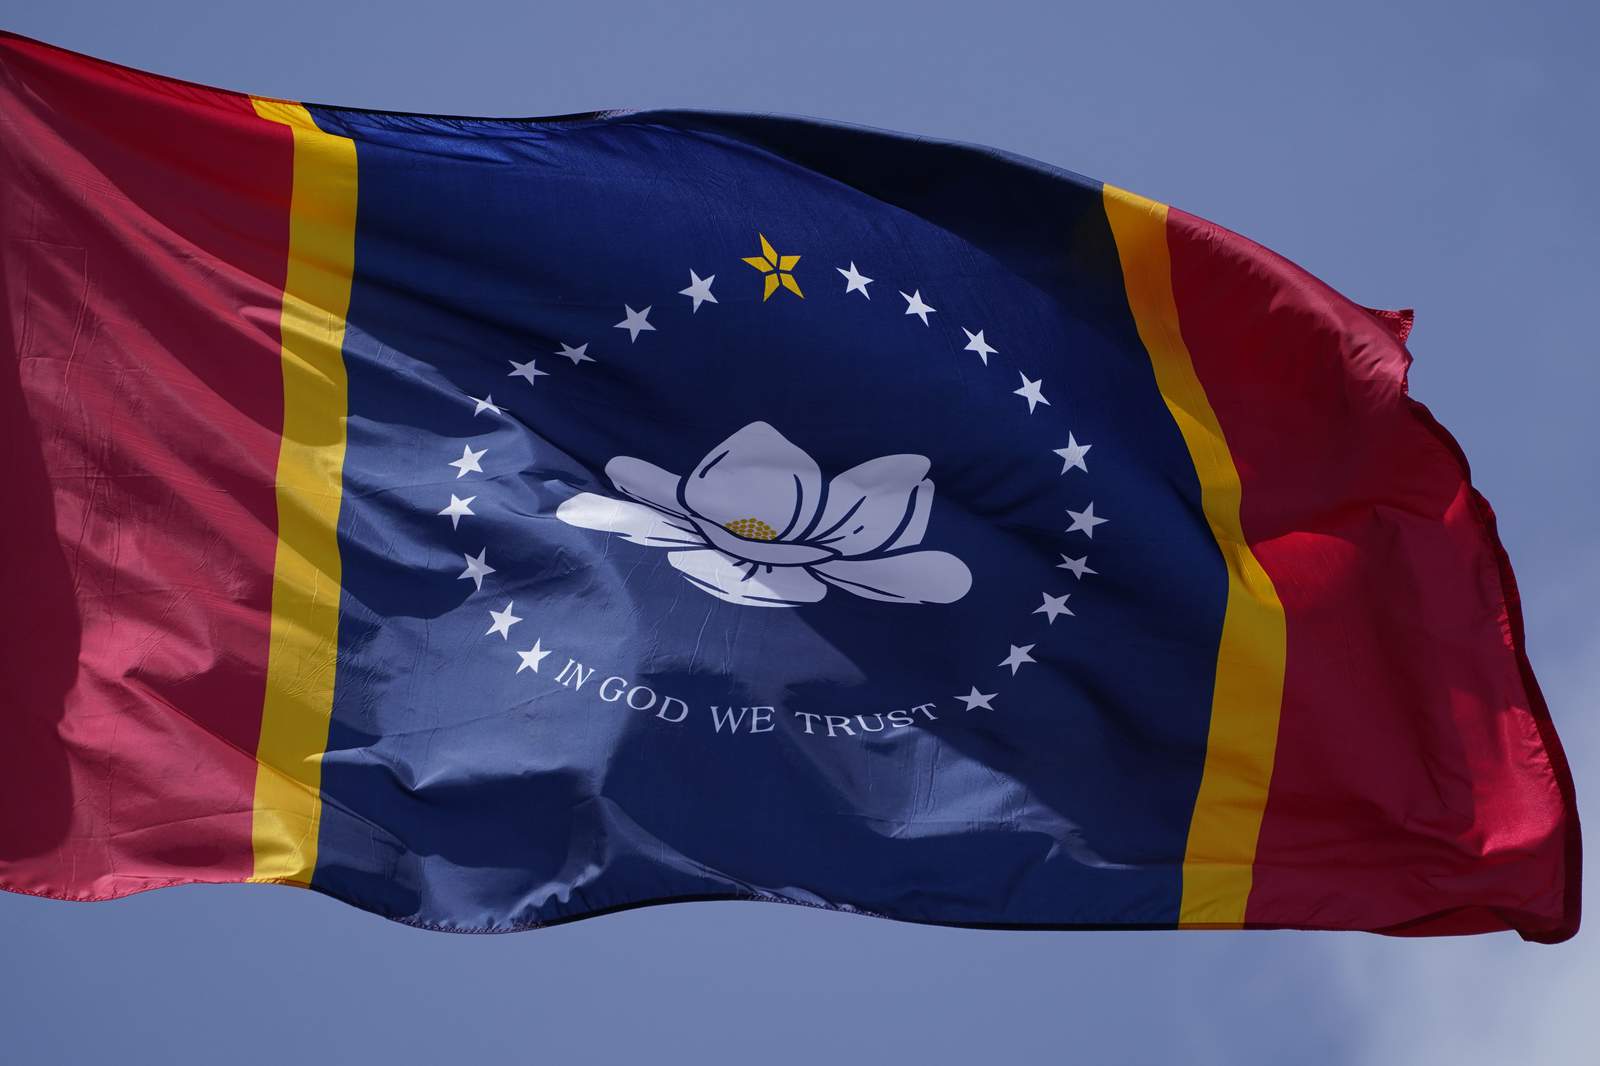 New Mississippi flag without rebel symbol being put into law